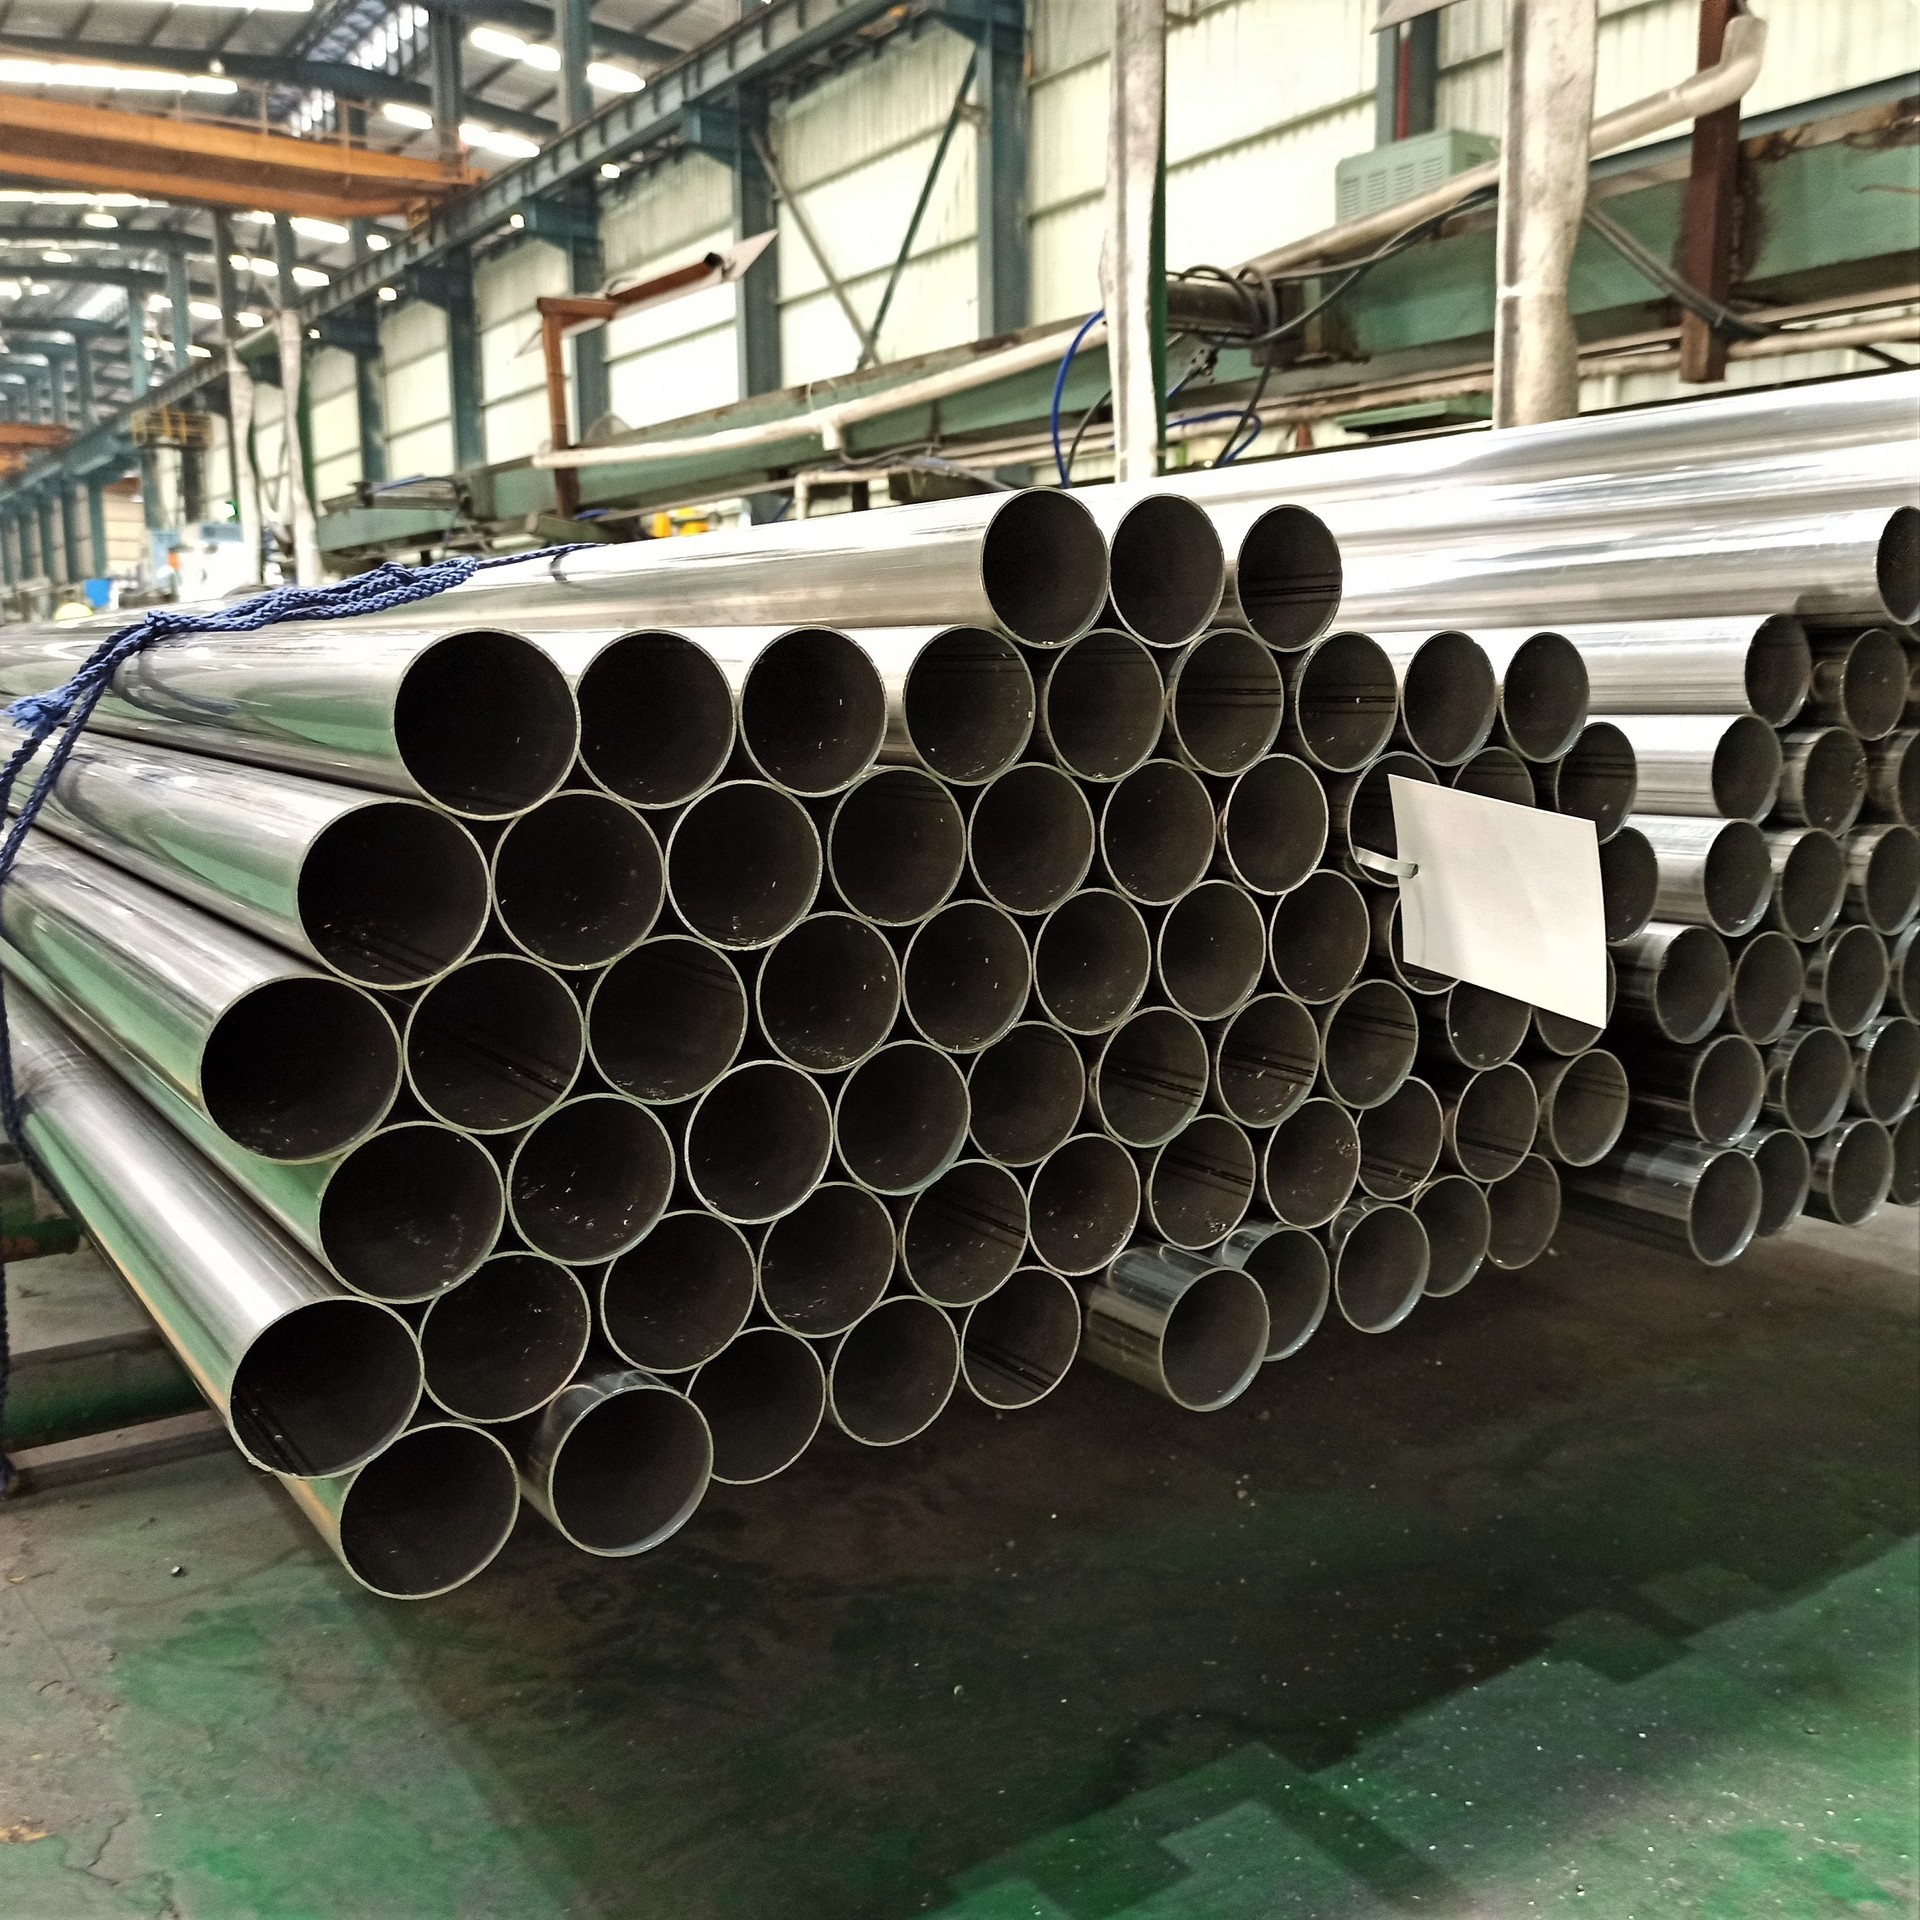 Stainless steel 316/316L pipe Specialized in the production of